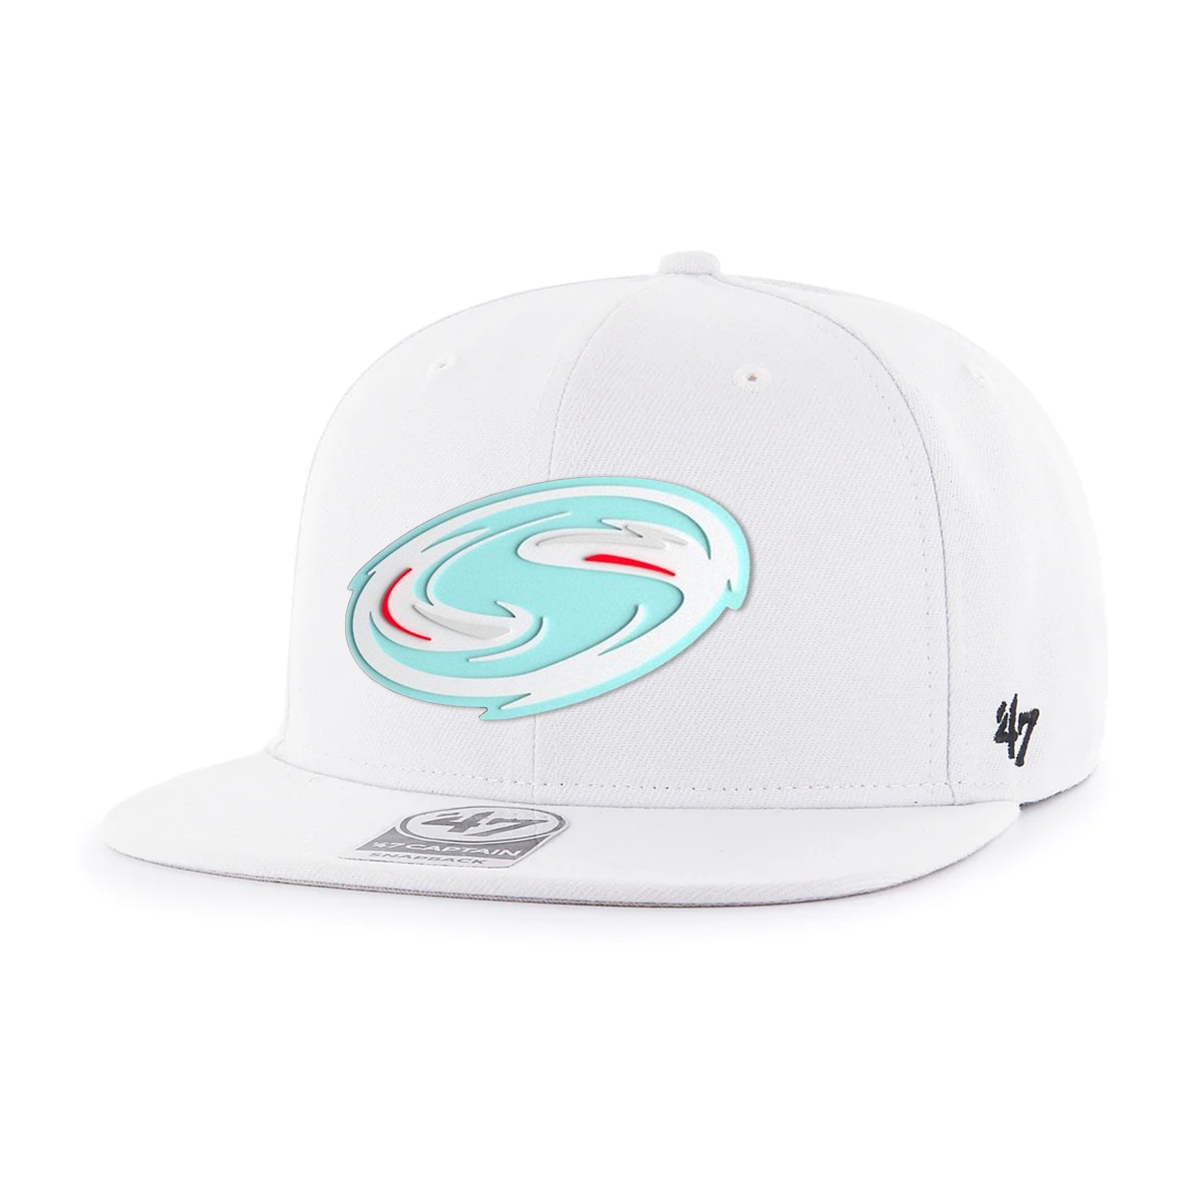 STORM '47 Whiteout Hat